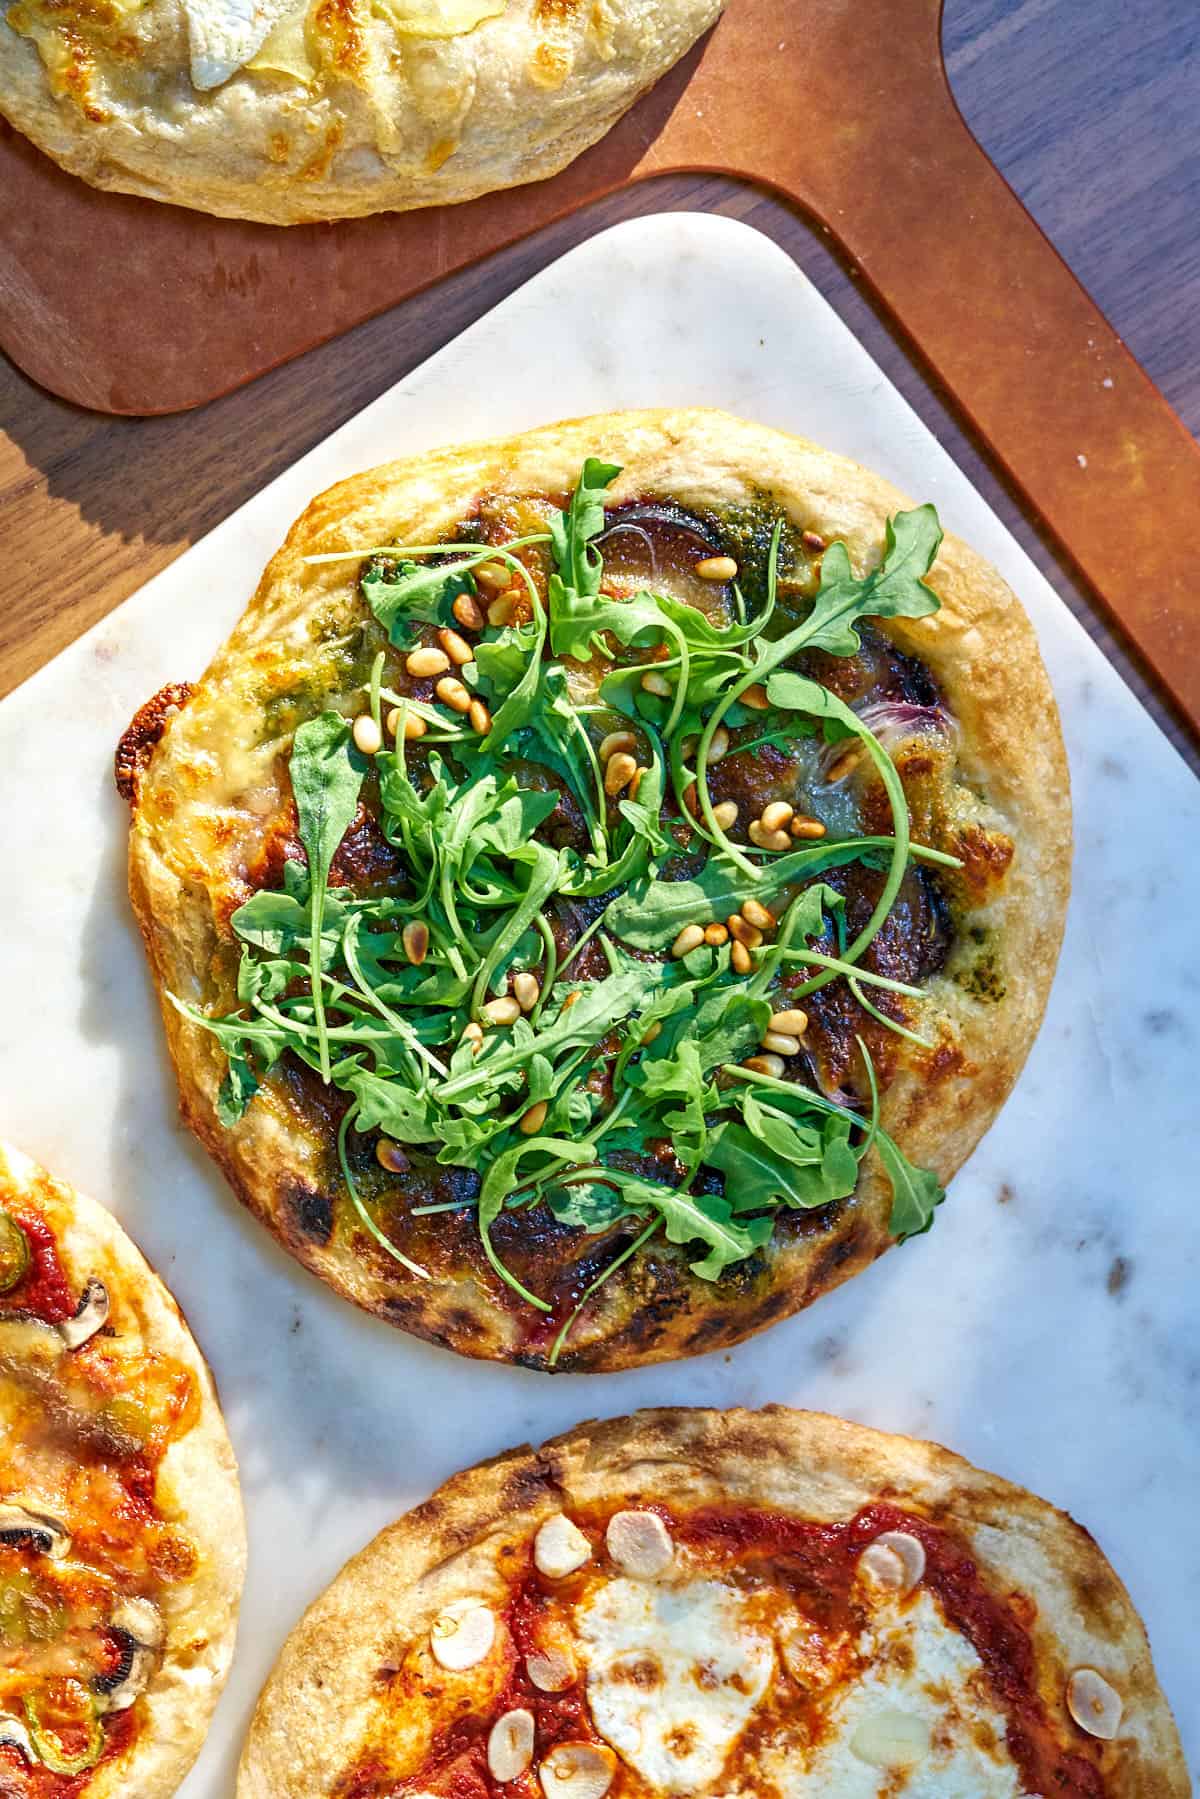 A baked pizza topped with fig and arugula on white marble next to more pizza.